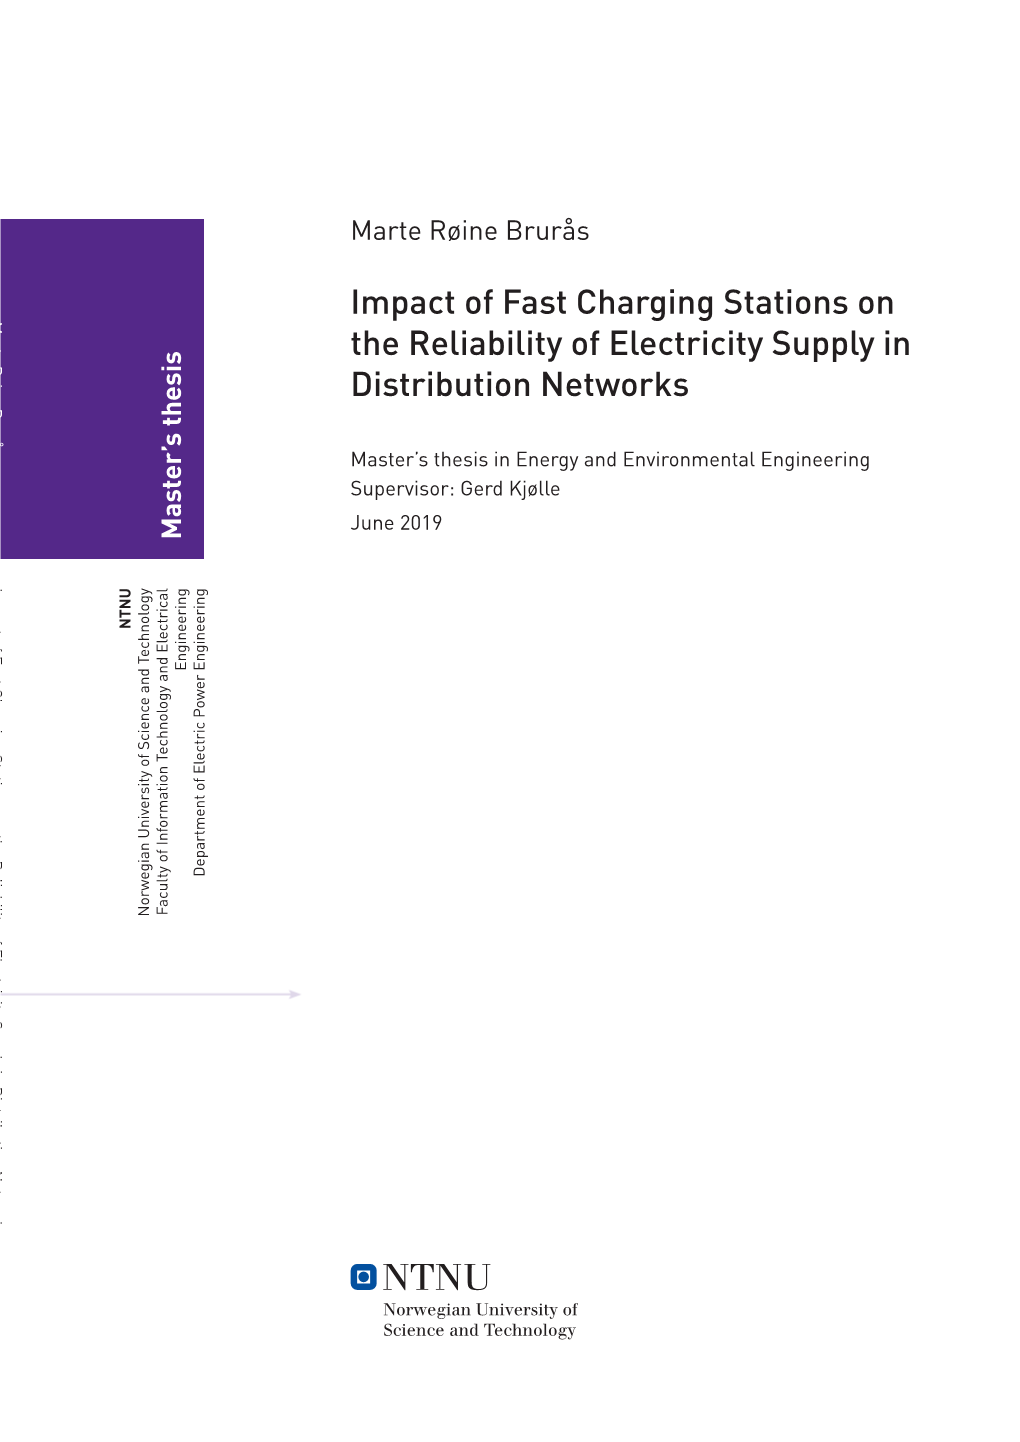 Impact of Fast Charging Stations on the Reliability of Electricity Supply in Distribution Networks